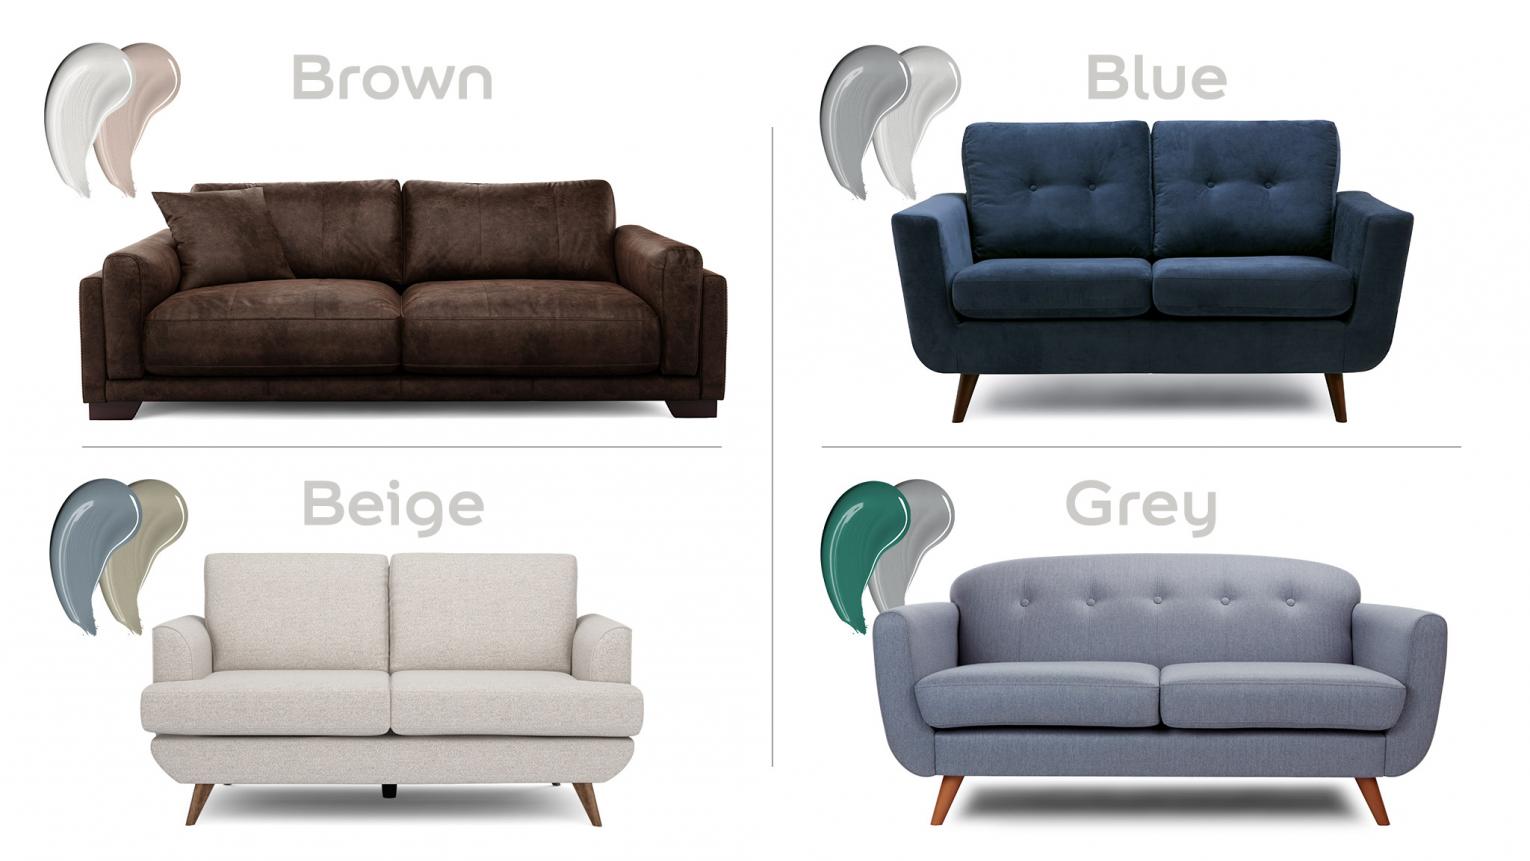 8 Paint Colours To Match Your Sofa Dulux, Paint Color To Match Brown Leather Couch